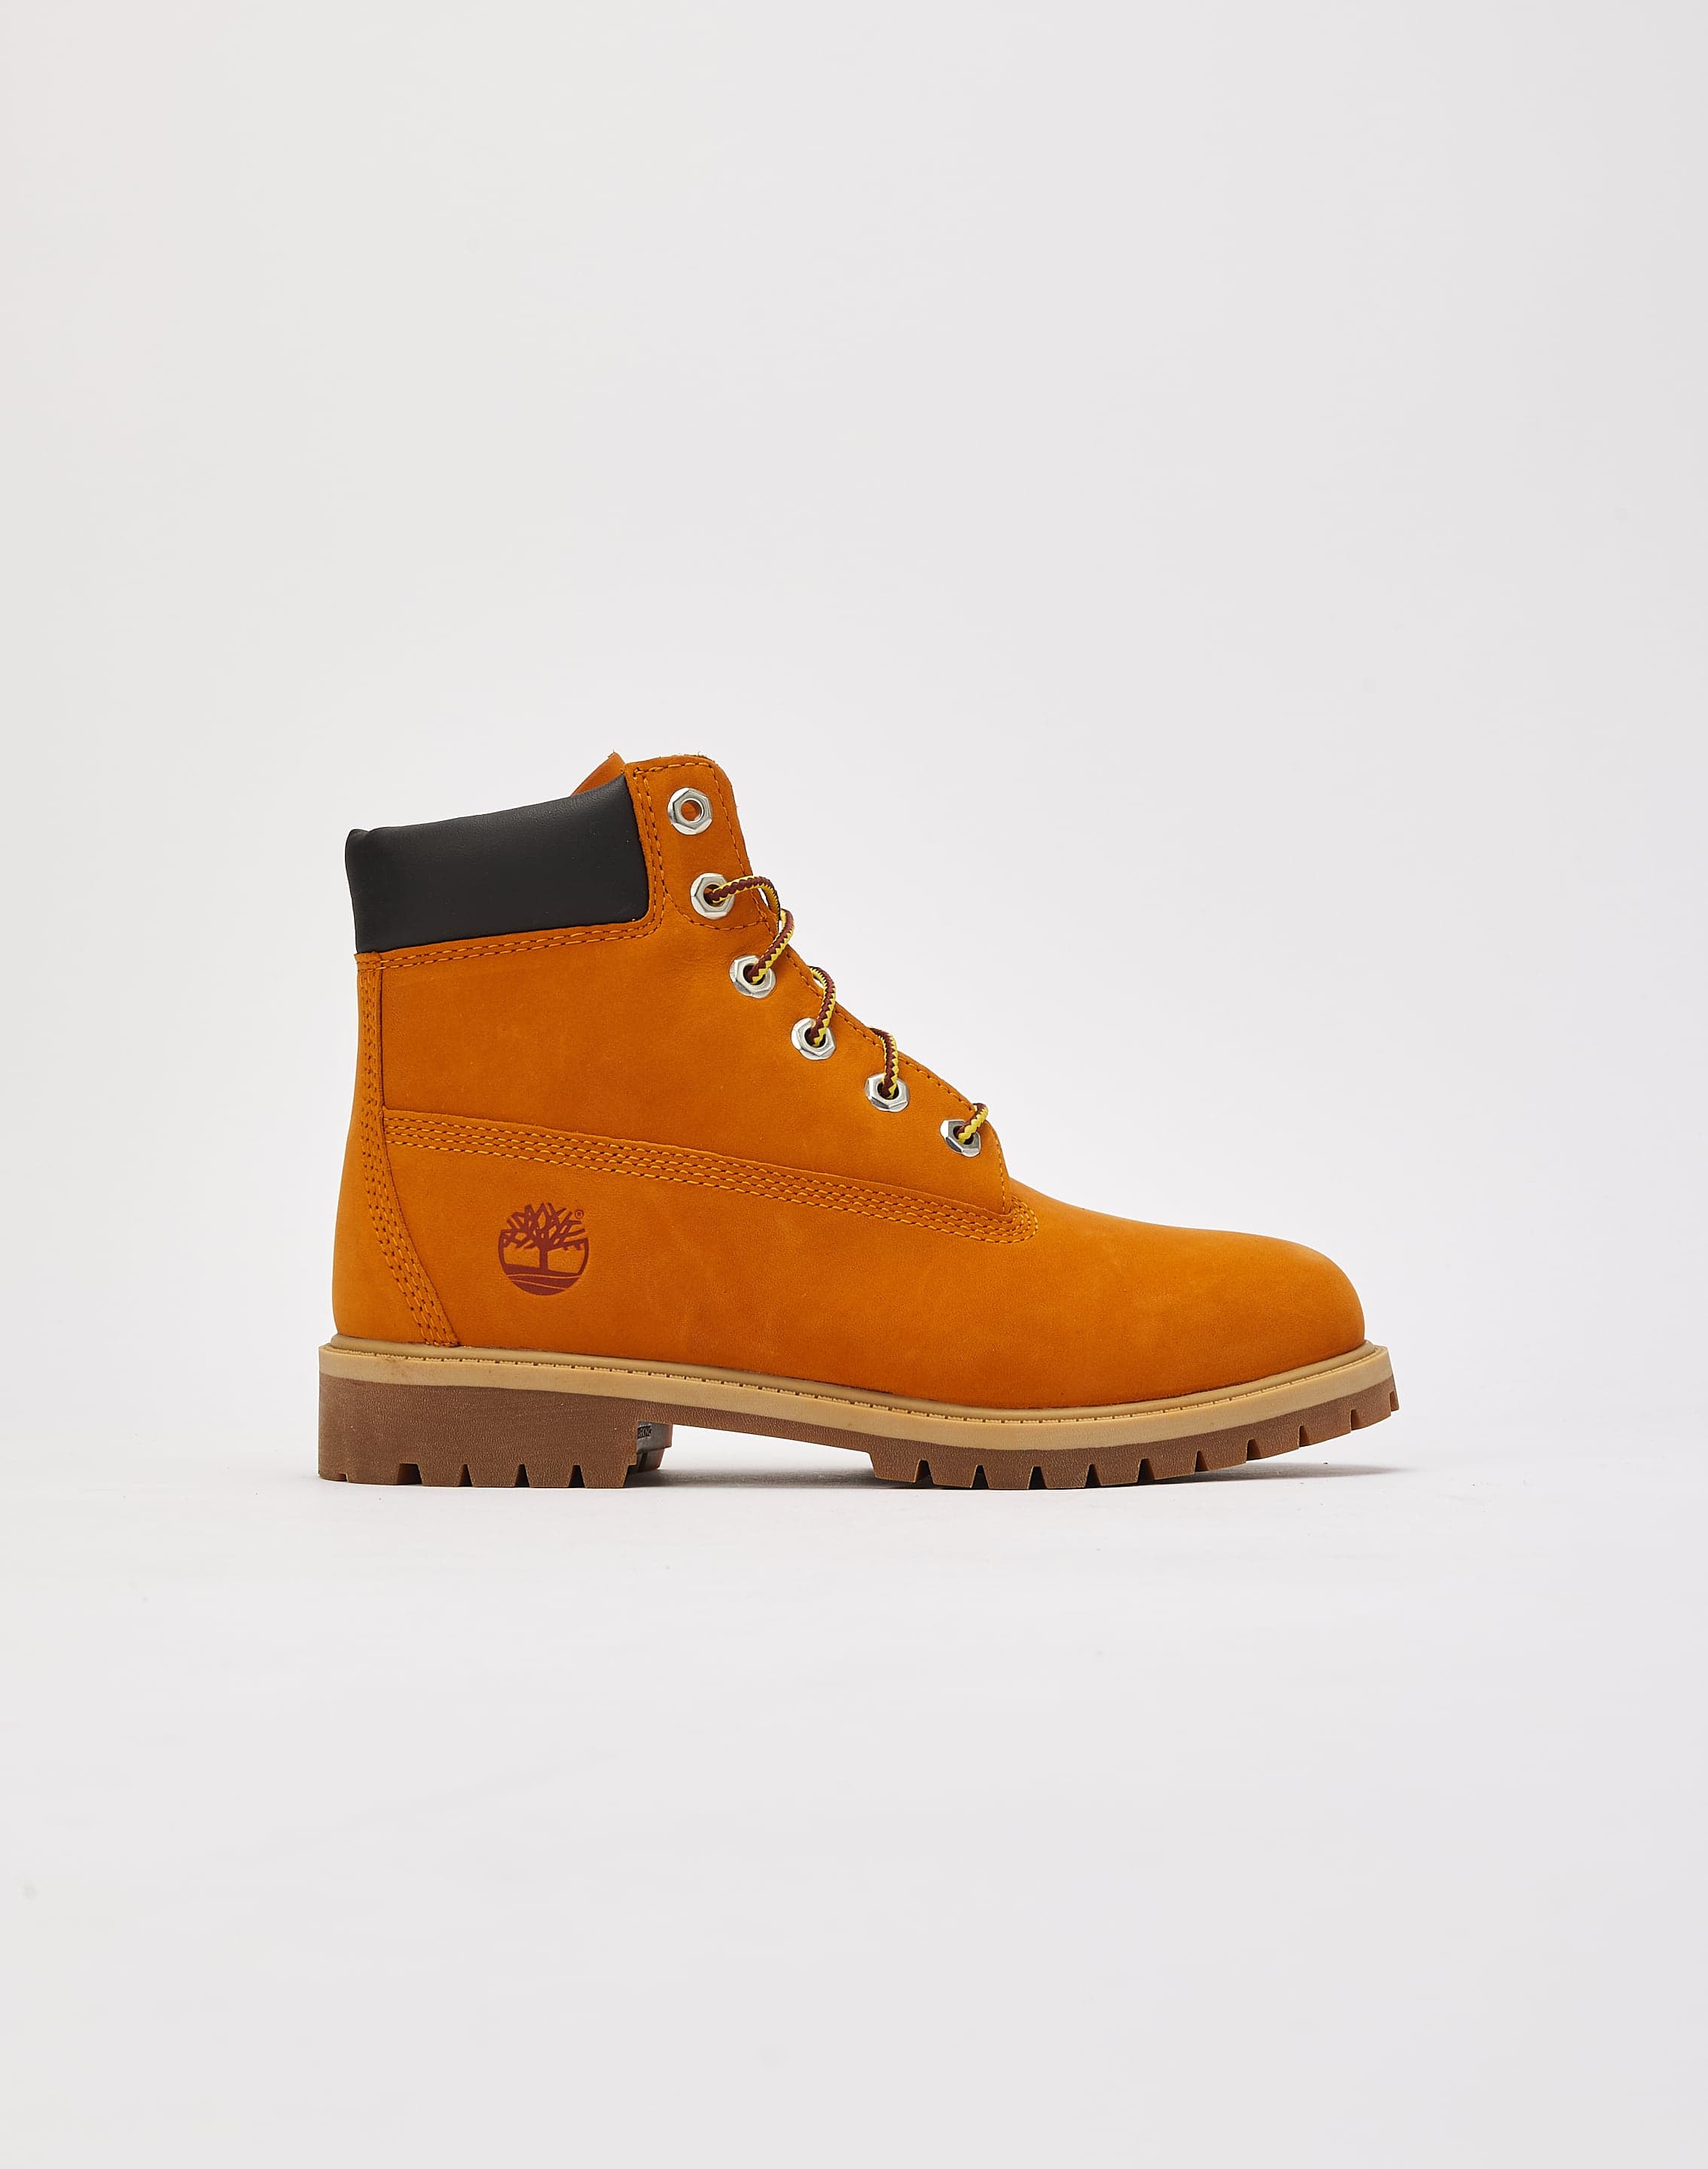 Timberland 6-Inch Premium Waterproof Boots 'Cheddar' – DTLR